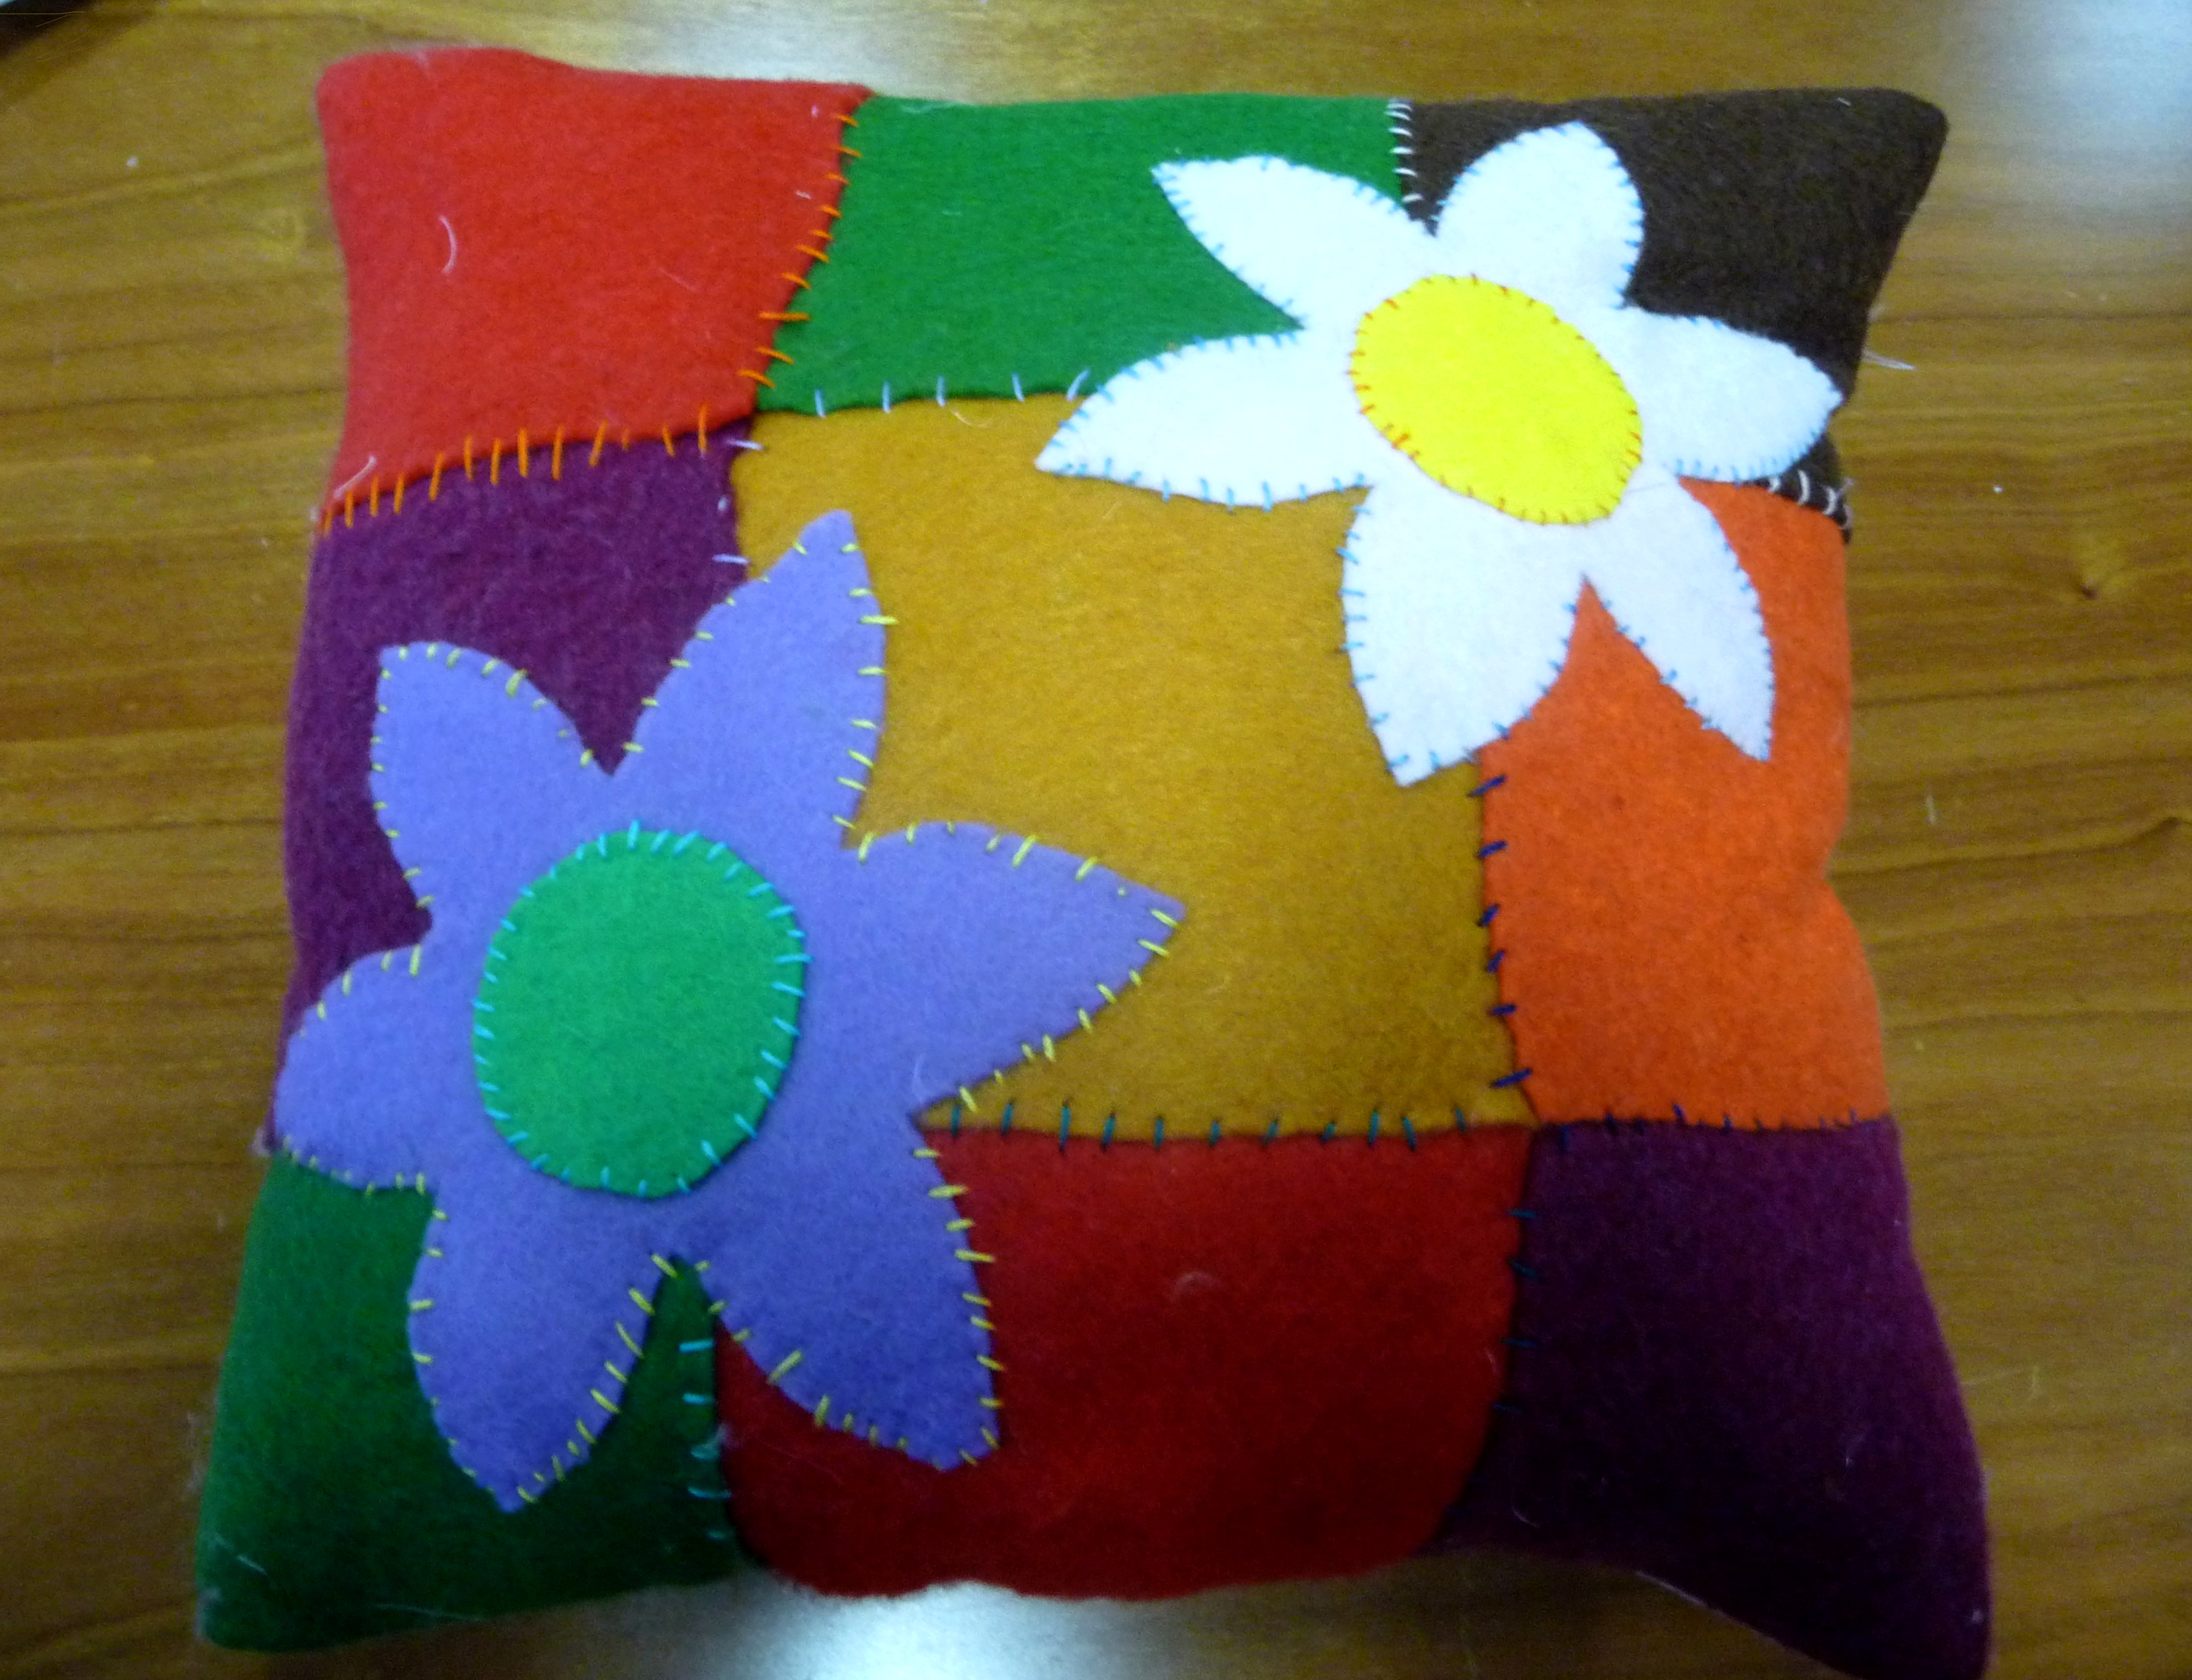 another completed applique cushion at YE group meeting in March 2015